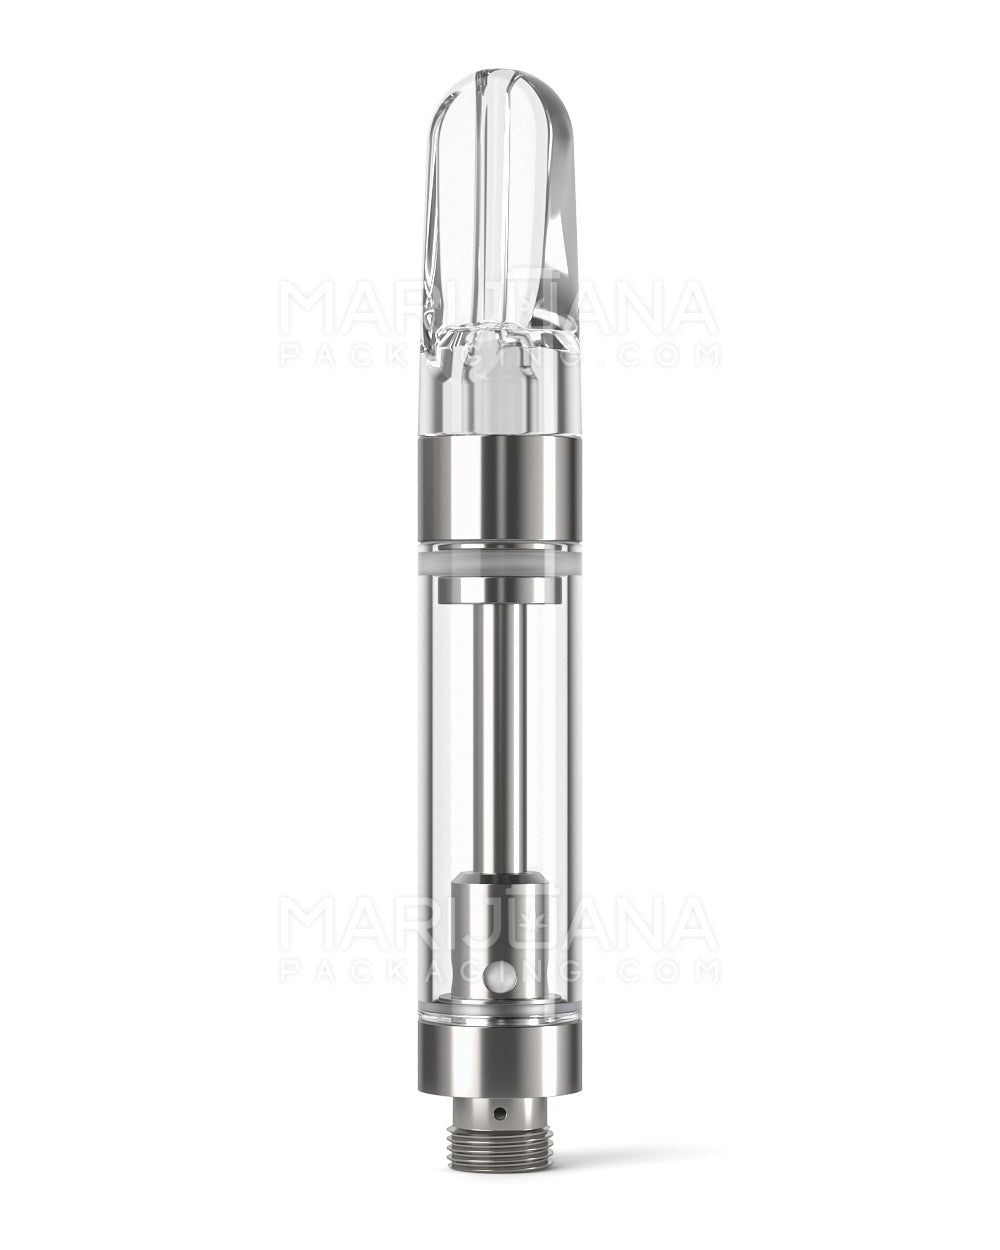 Ceramic Core Glass Vape Cartridge with Flat Clear Plastic Mouthpiece | 1mL - Press On - 100 Count - 1